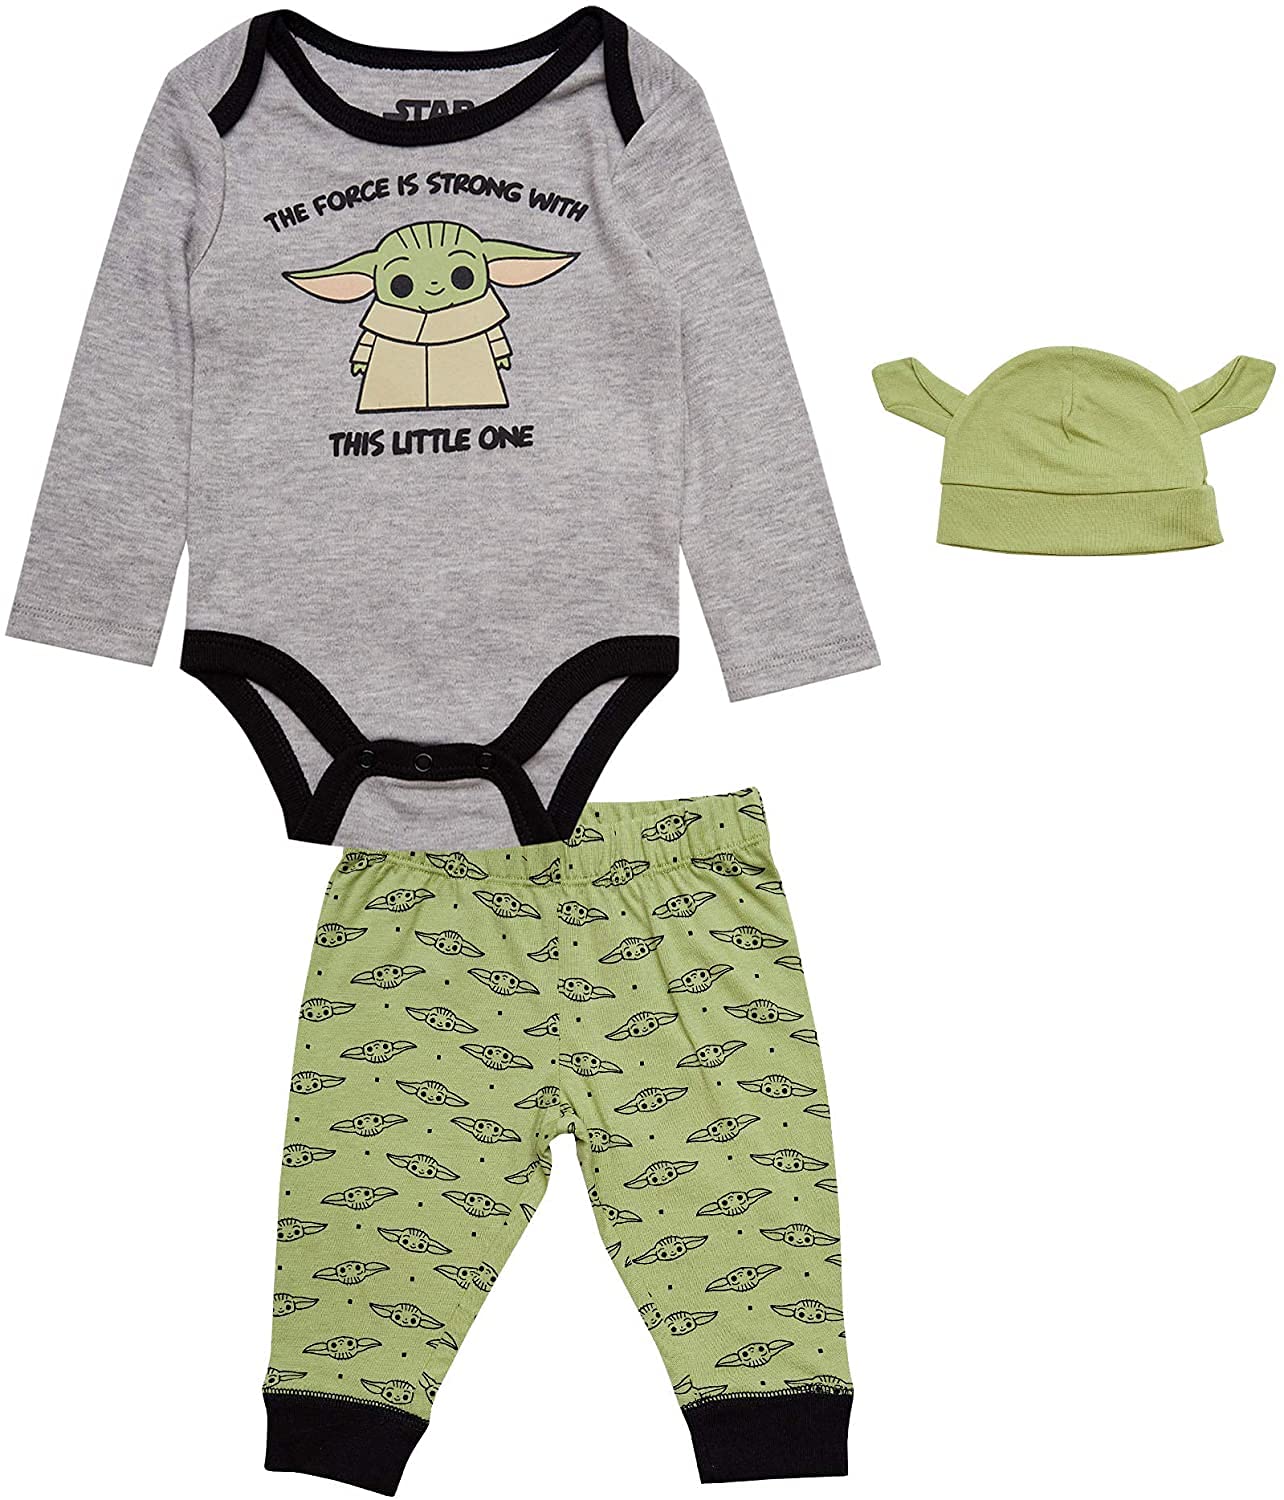 STAR WARS The Mandalorian Baby Boys Bodysuit, Pants and Hat Clothing Set - Baby Yoda Baby Clothes